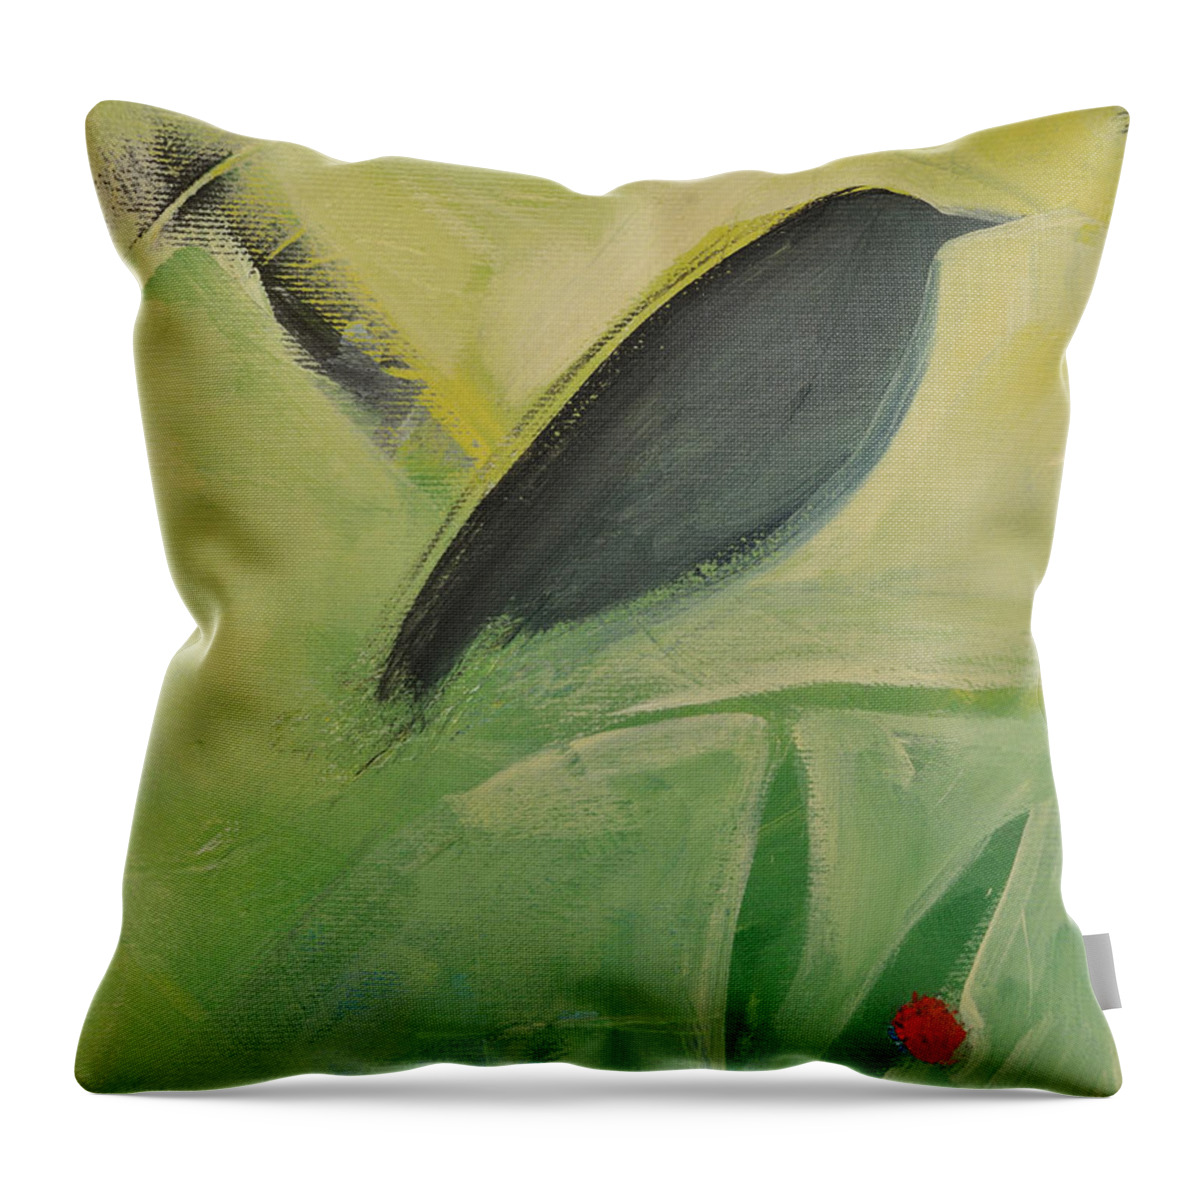 Triptych Throw Pillow featuring the painting Bird and Red Berry a by Tim Nyberg